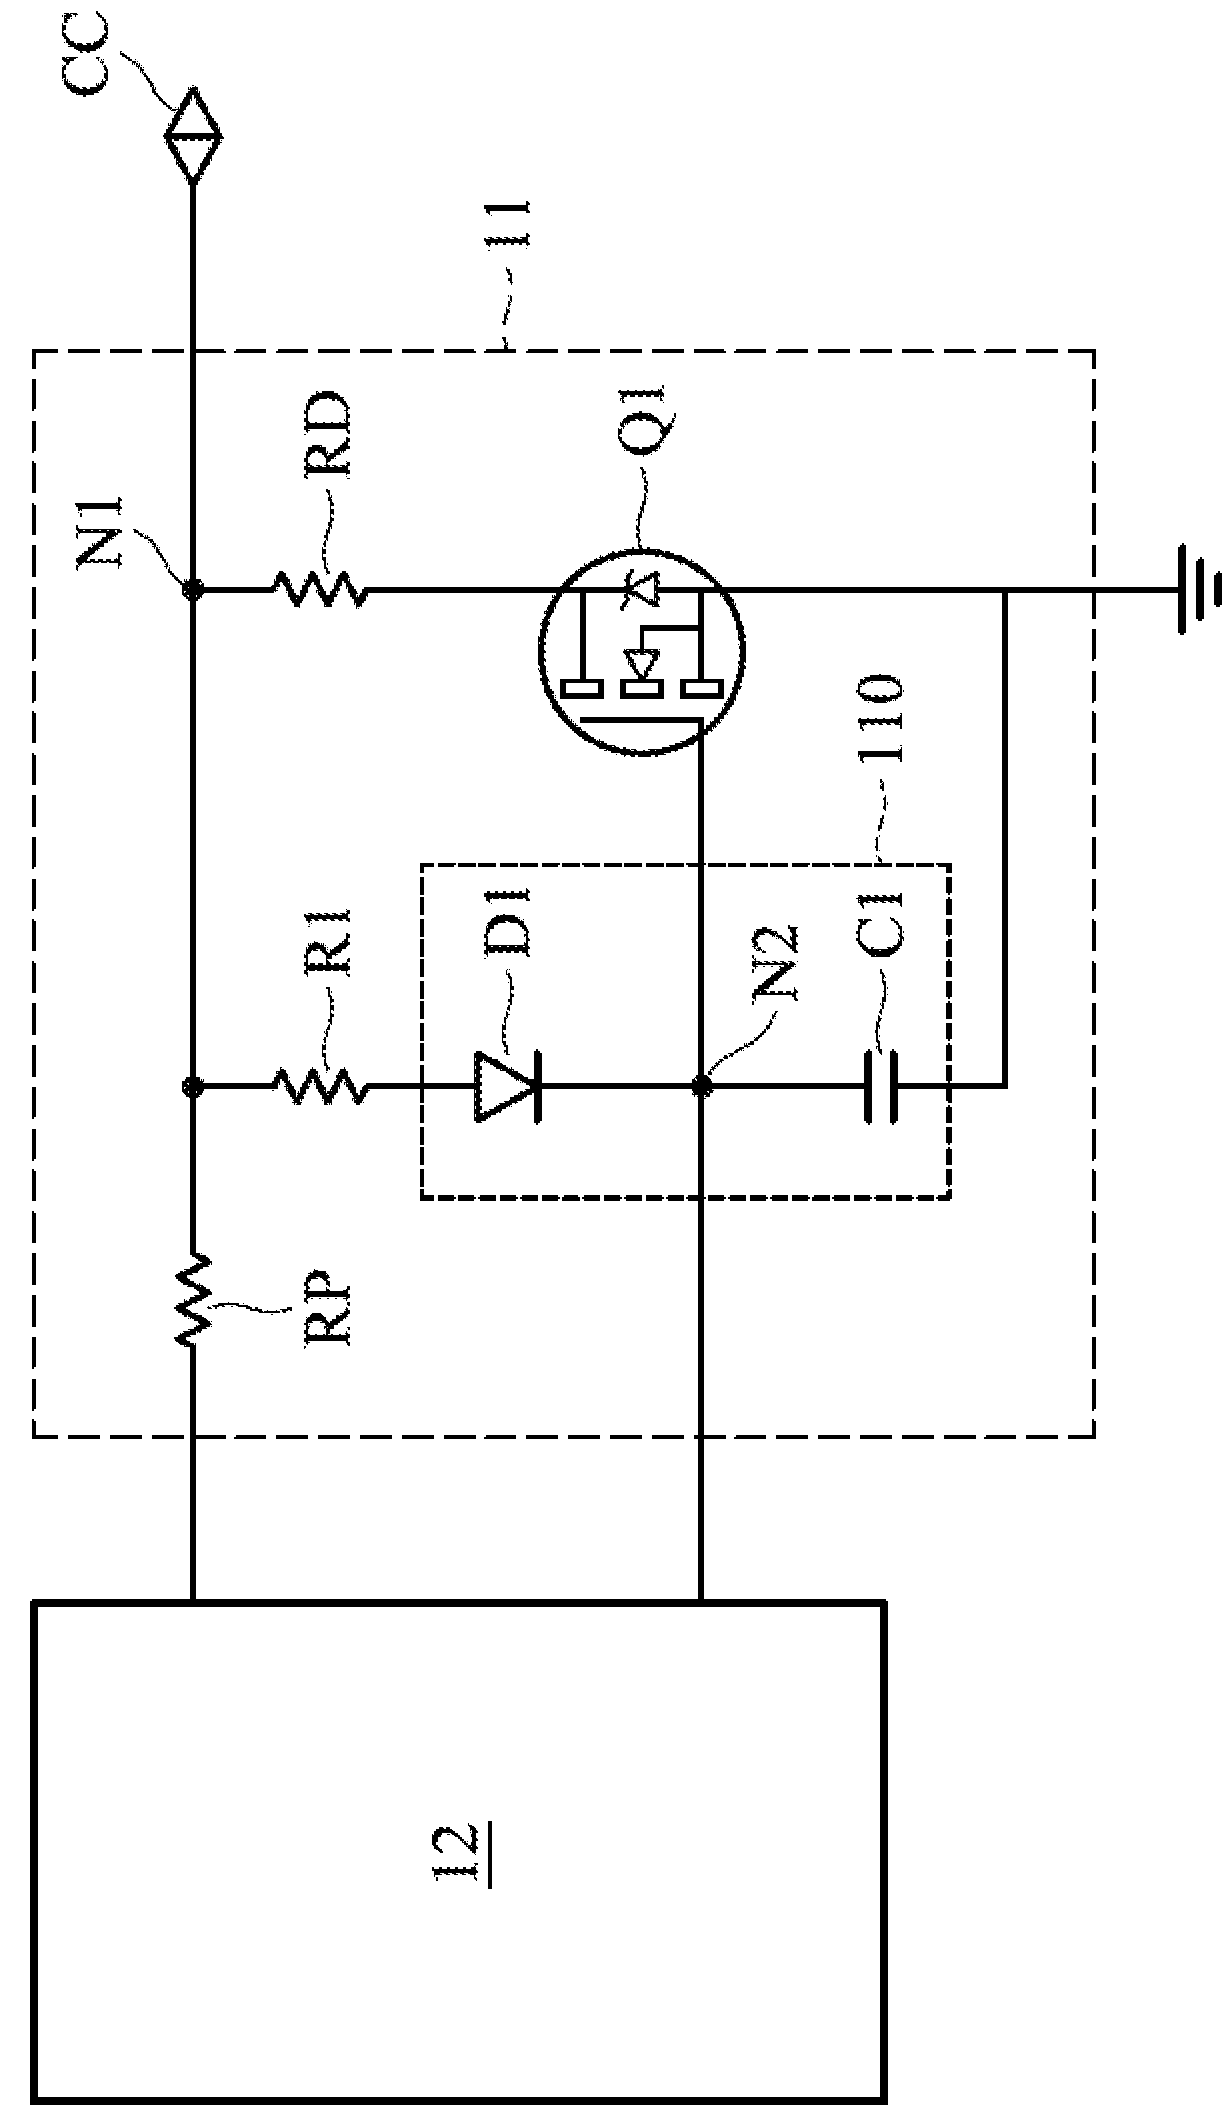 Power-up control circuit and mobile power bank